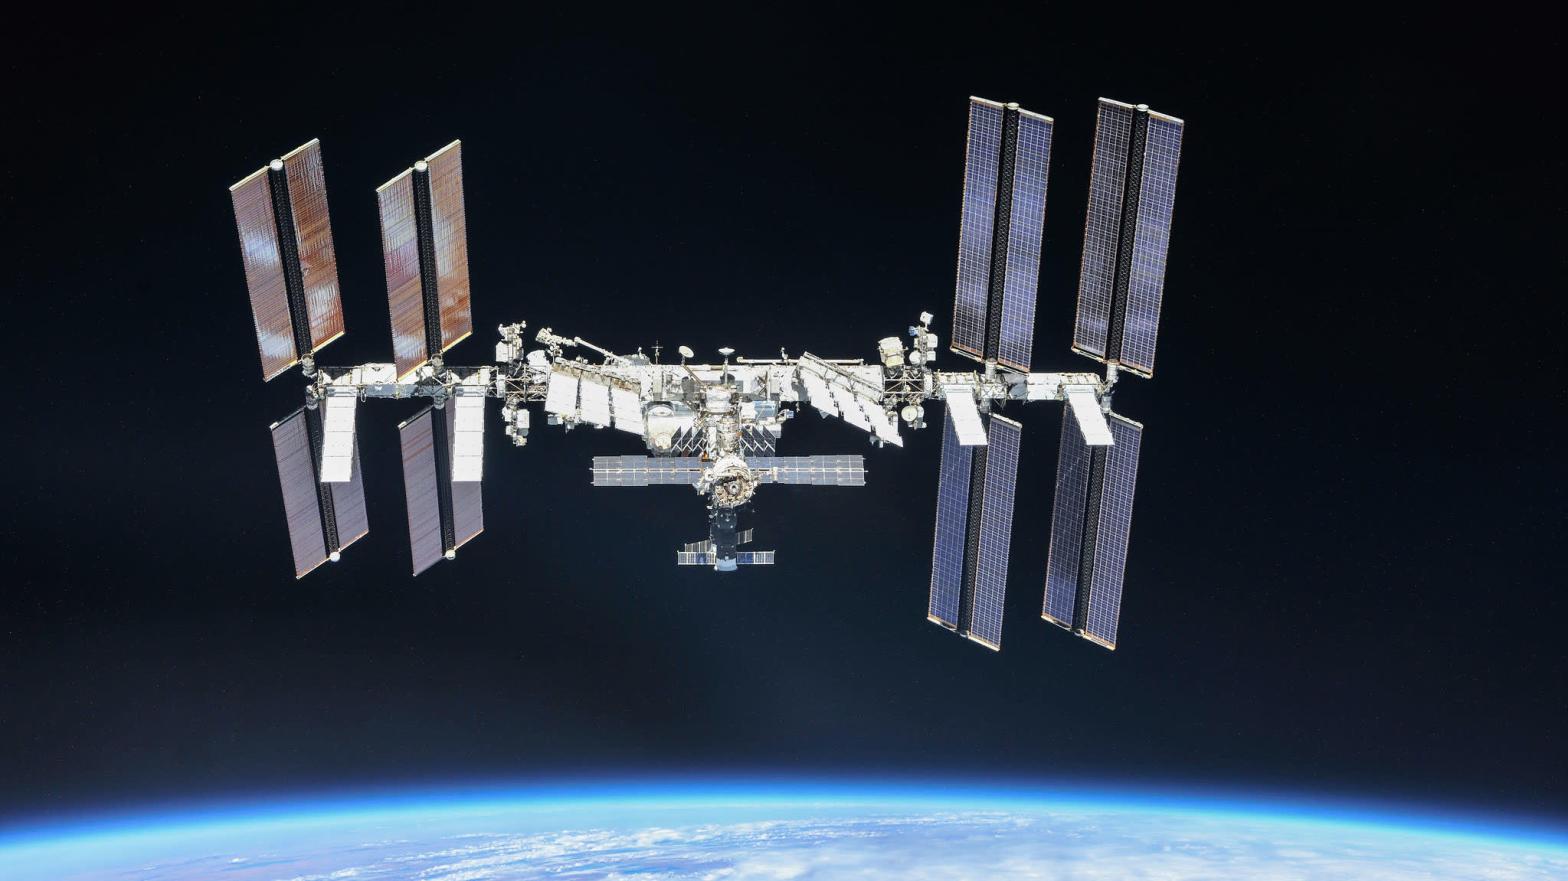 The ISS as it was seen on October 4, 2018. (Image: NASA)